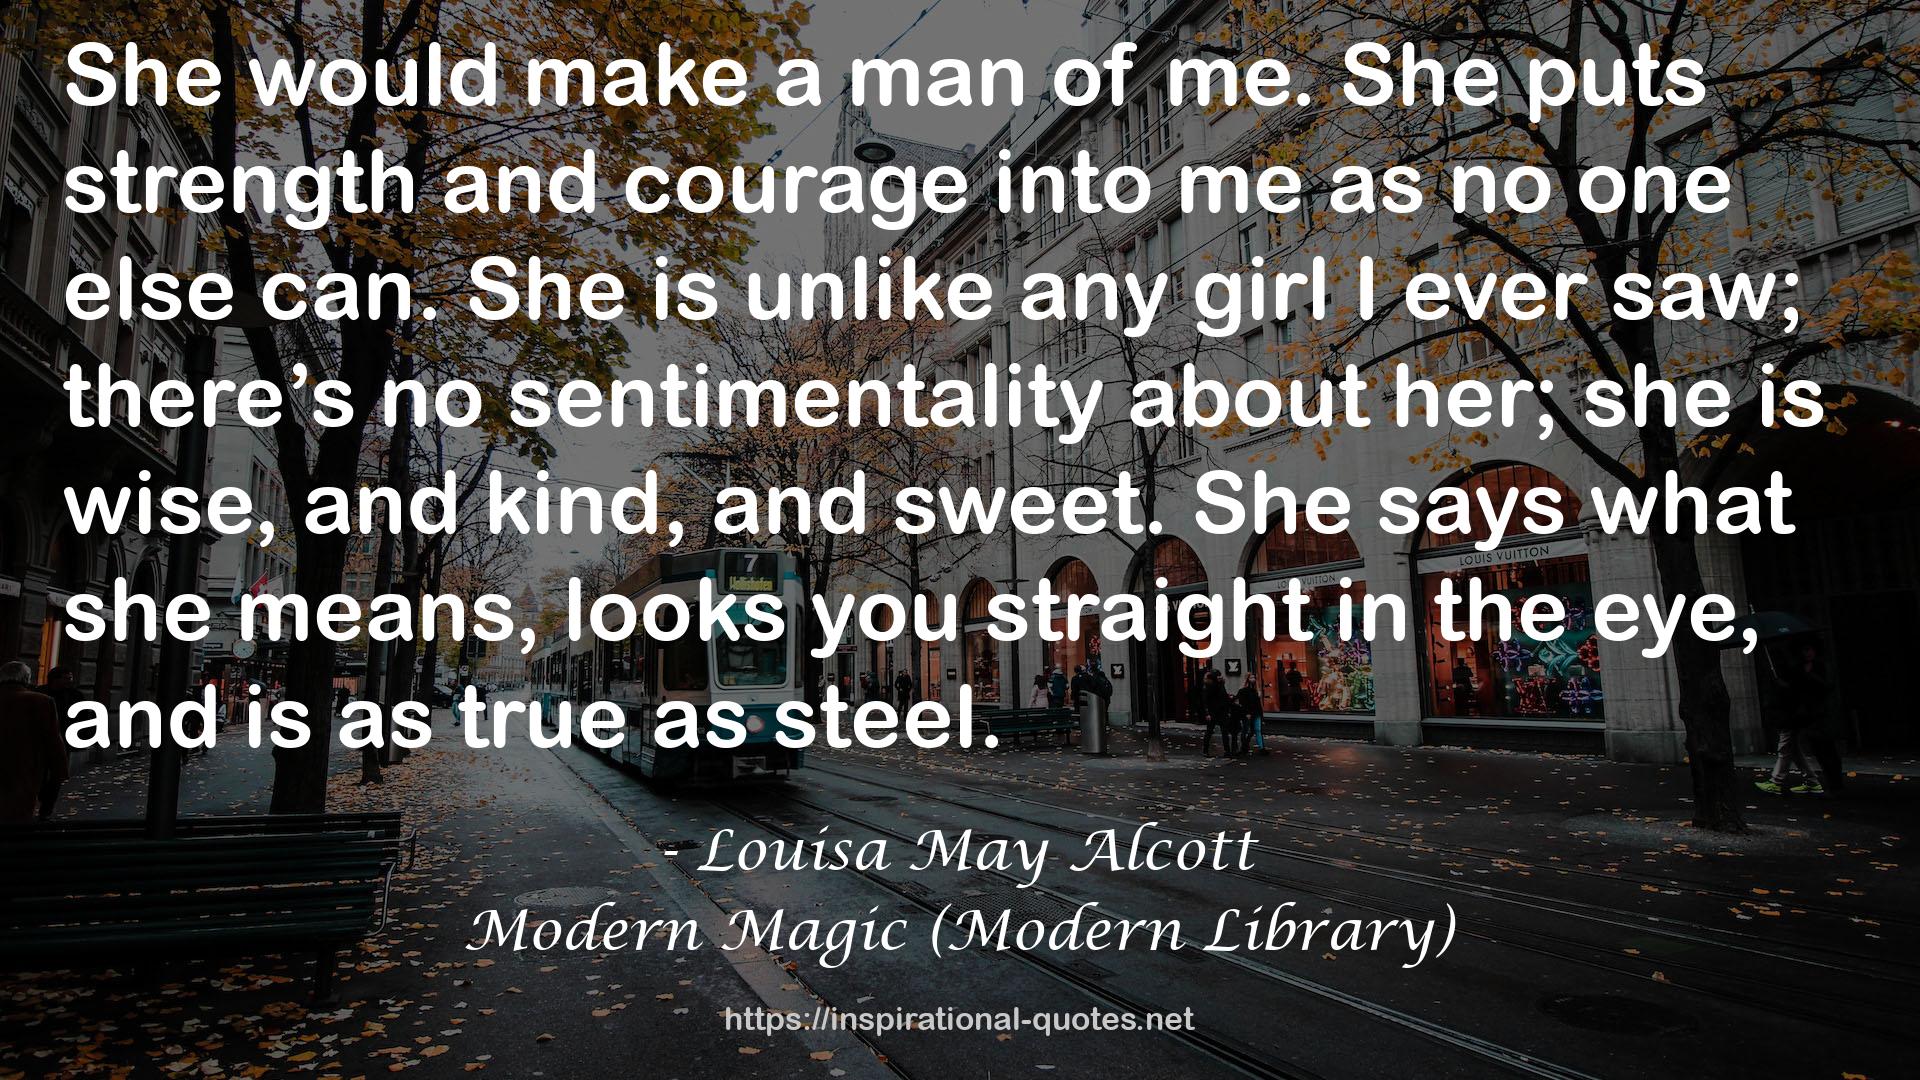 Modern Magic (Modern Library) QUOTES